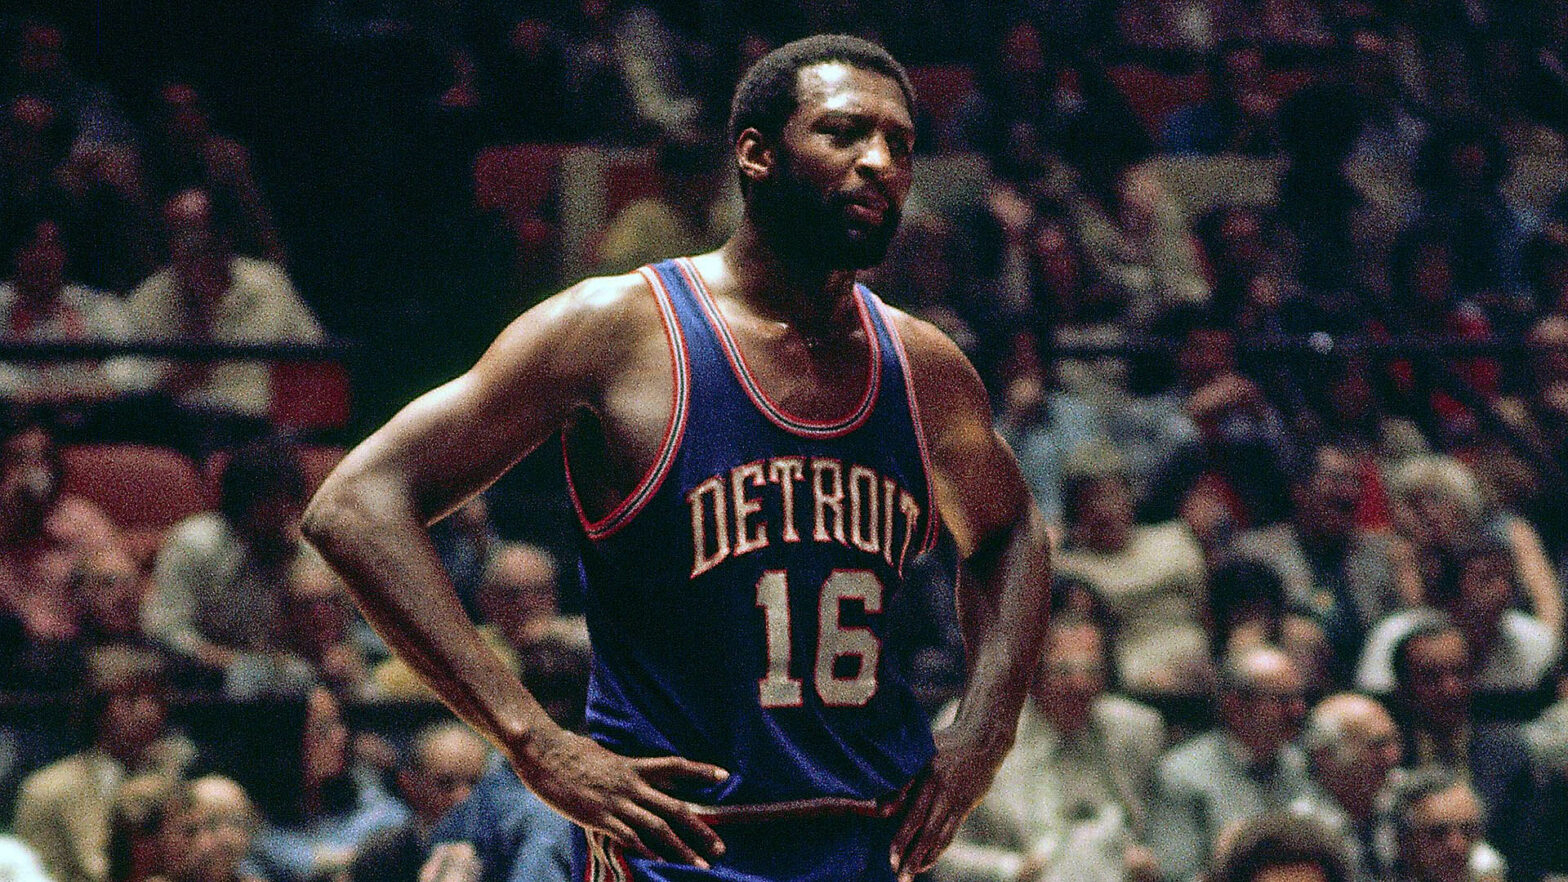 BOSTON - 1974:  Bob Lanier #16 of the Detroit Pistons looks on during a game against the Boston Celtics played in 1974 at the Boston Garden in Boston, Massachusetts. NOTE TO USER: User expressly acknowledges and agrees that, by downloading and or using this photograph, User is consenting to the terms and conditions of the Getty Images License Agreement. Mandatory Copyright Notice: Copyright 1974 NBAE (Photo by Dick Raphael/NBAE via Getty Images)